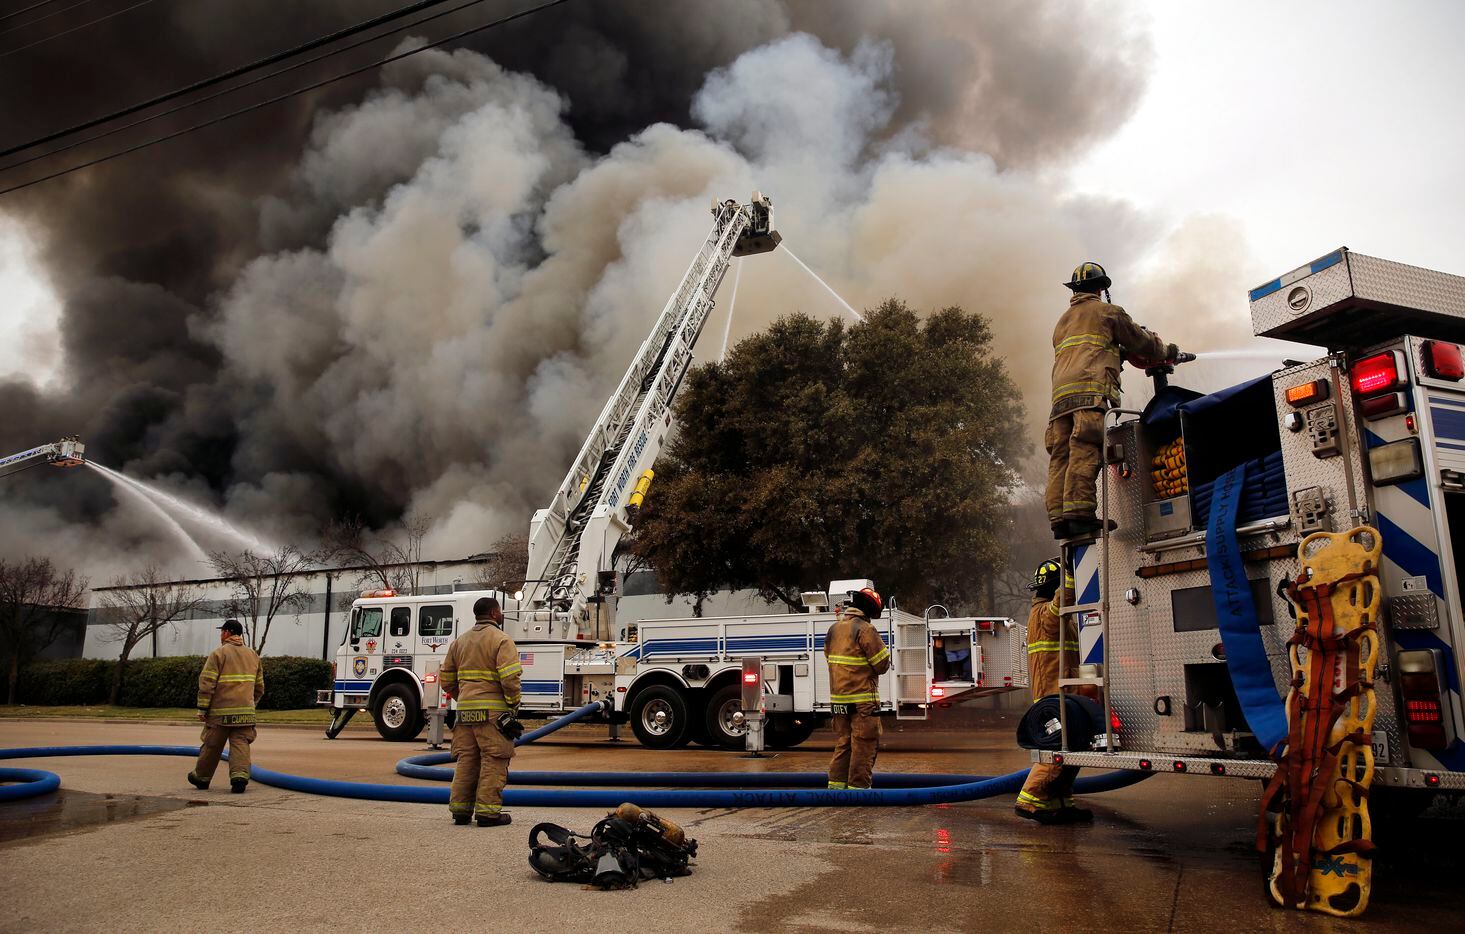 Fort Worth firefighters battle a large 5-alarm fire at the Advanced Foam Recycling facility in Richland Hills, Texas, Thursday, February 25, 2021. Advanced Foam Recycling recycles materials to be processed and used for carpet underlay, pillows, and furniture, according to the company website. Over 125 firefighters from Richland Hills, Haltom City, North Richland Hills and Fort Worth firefighters assisted on the commercial structure fire in the 2500 block of Handley Ederville Road in E. Fort Worth. (Tom Fox/The Dallas Morning News)